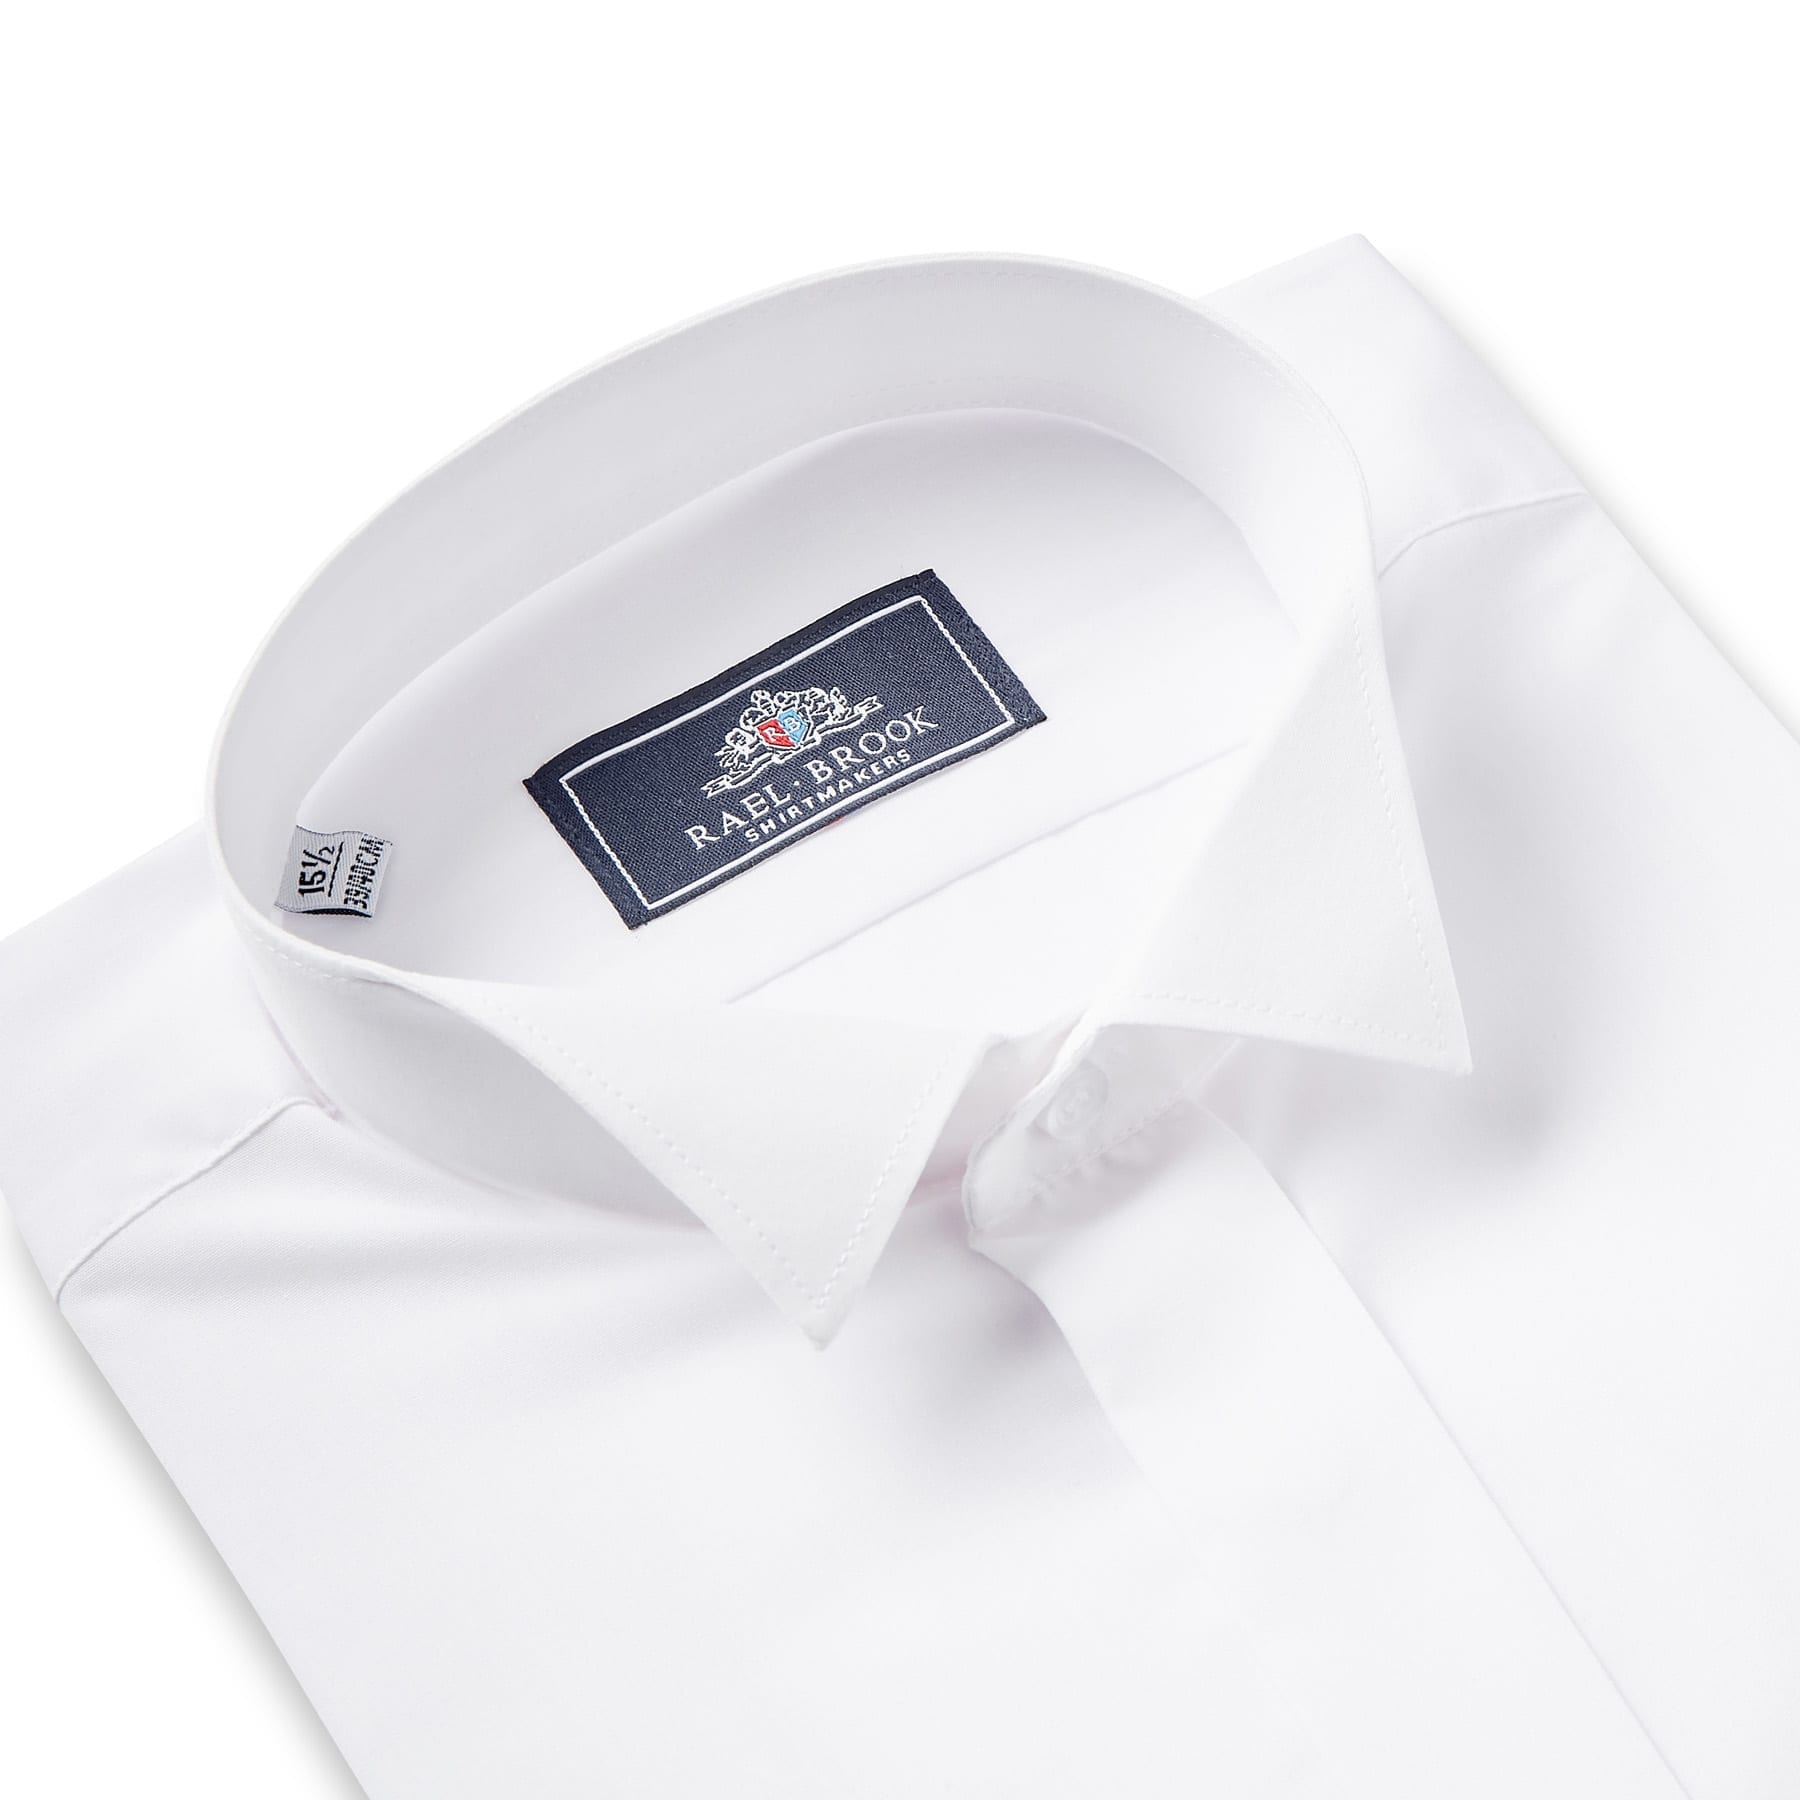 Plain Front Dress Shirt with Wing Collar - House of Henderson